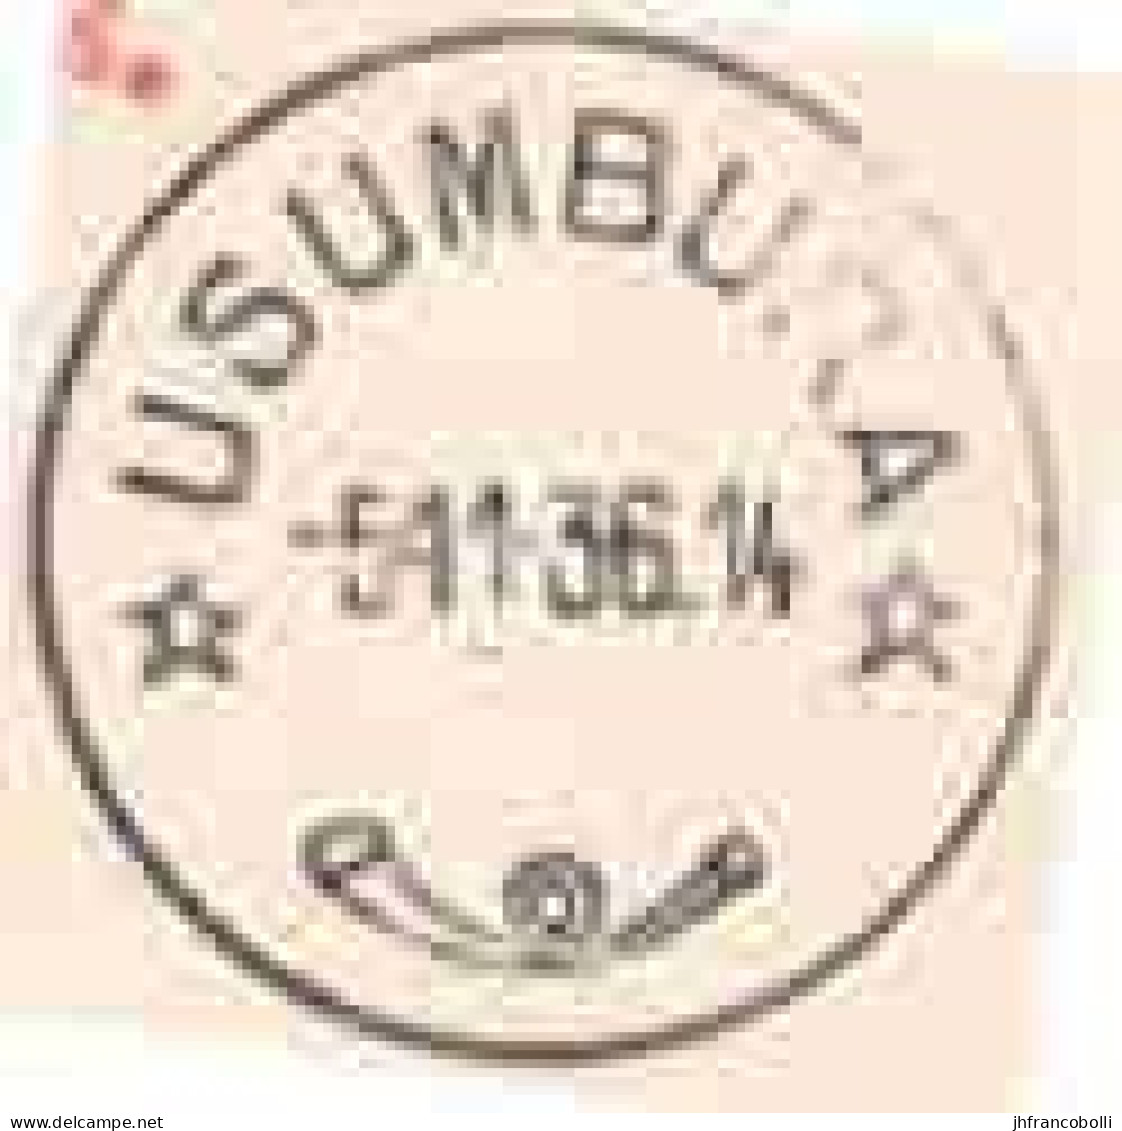 1947 USUMBURA WITH RU 142 STAMP TO HERSTAL (BELGIUM) PAR AIR MAIL LETTER - Stamped Stationery